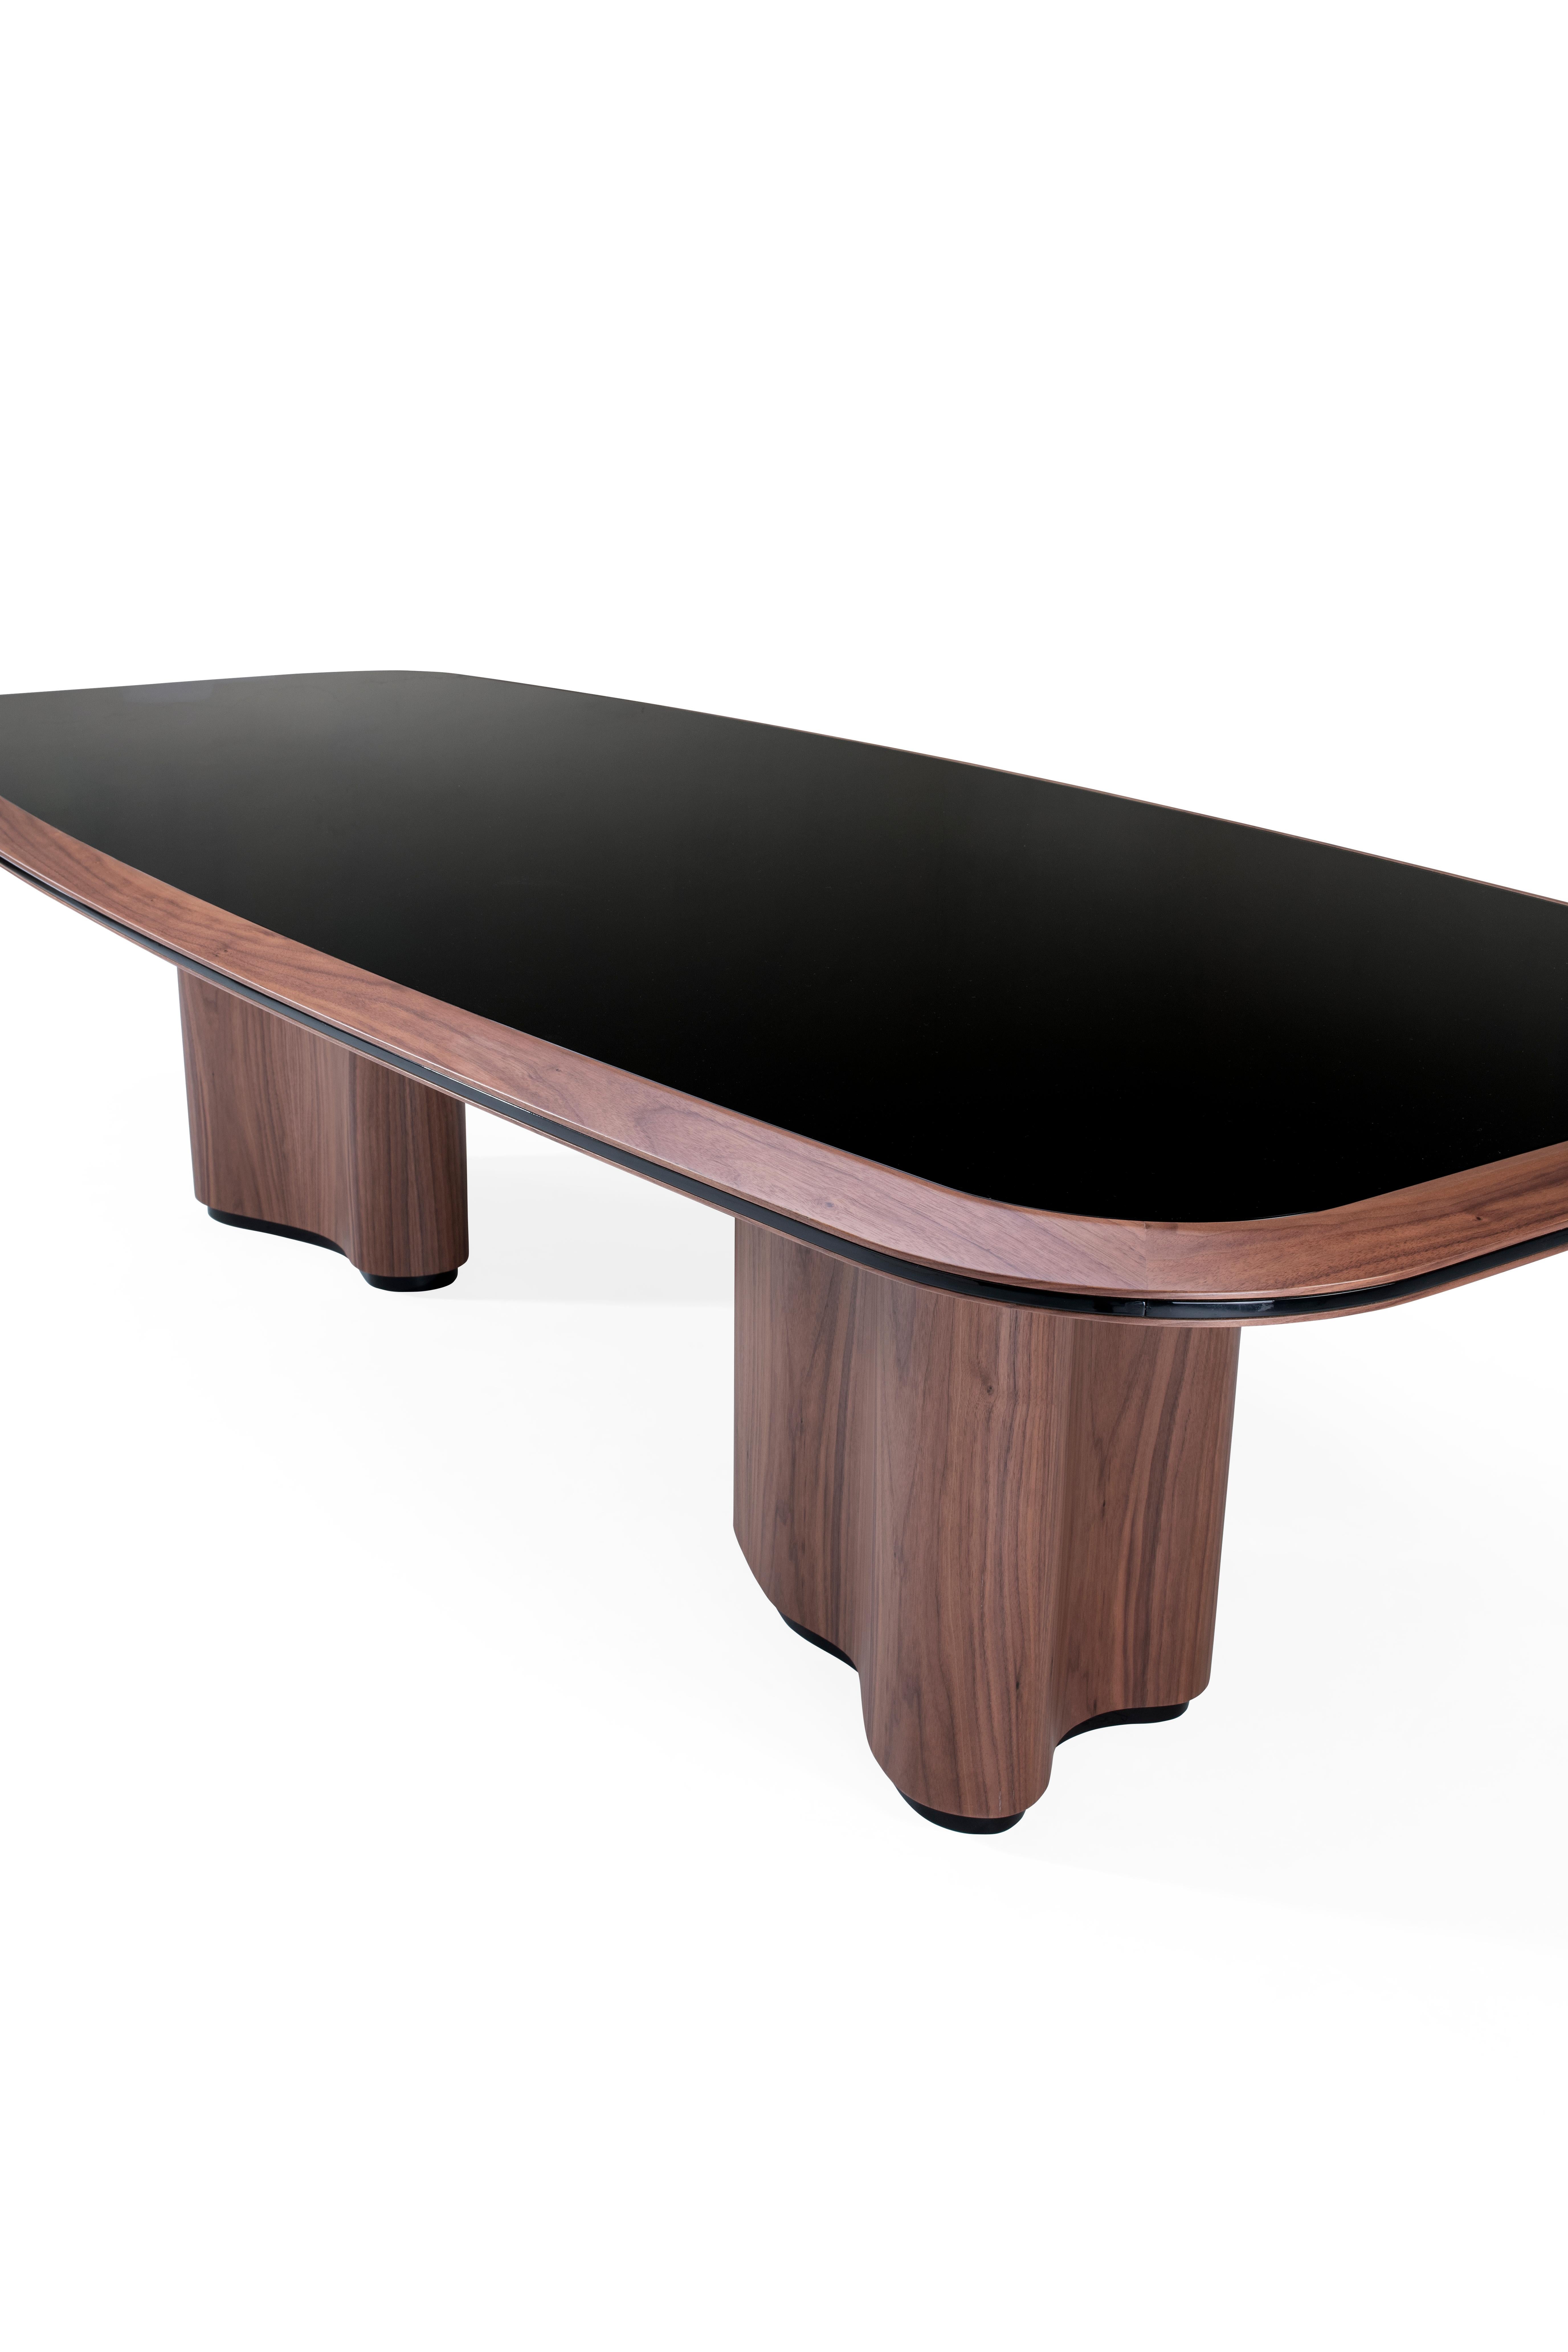 Modern MUXIMA dining table with organic-shaped legs For Sale